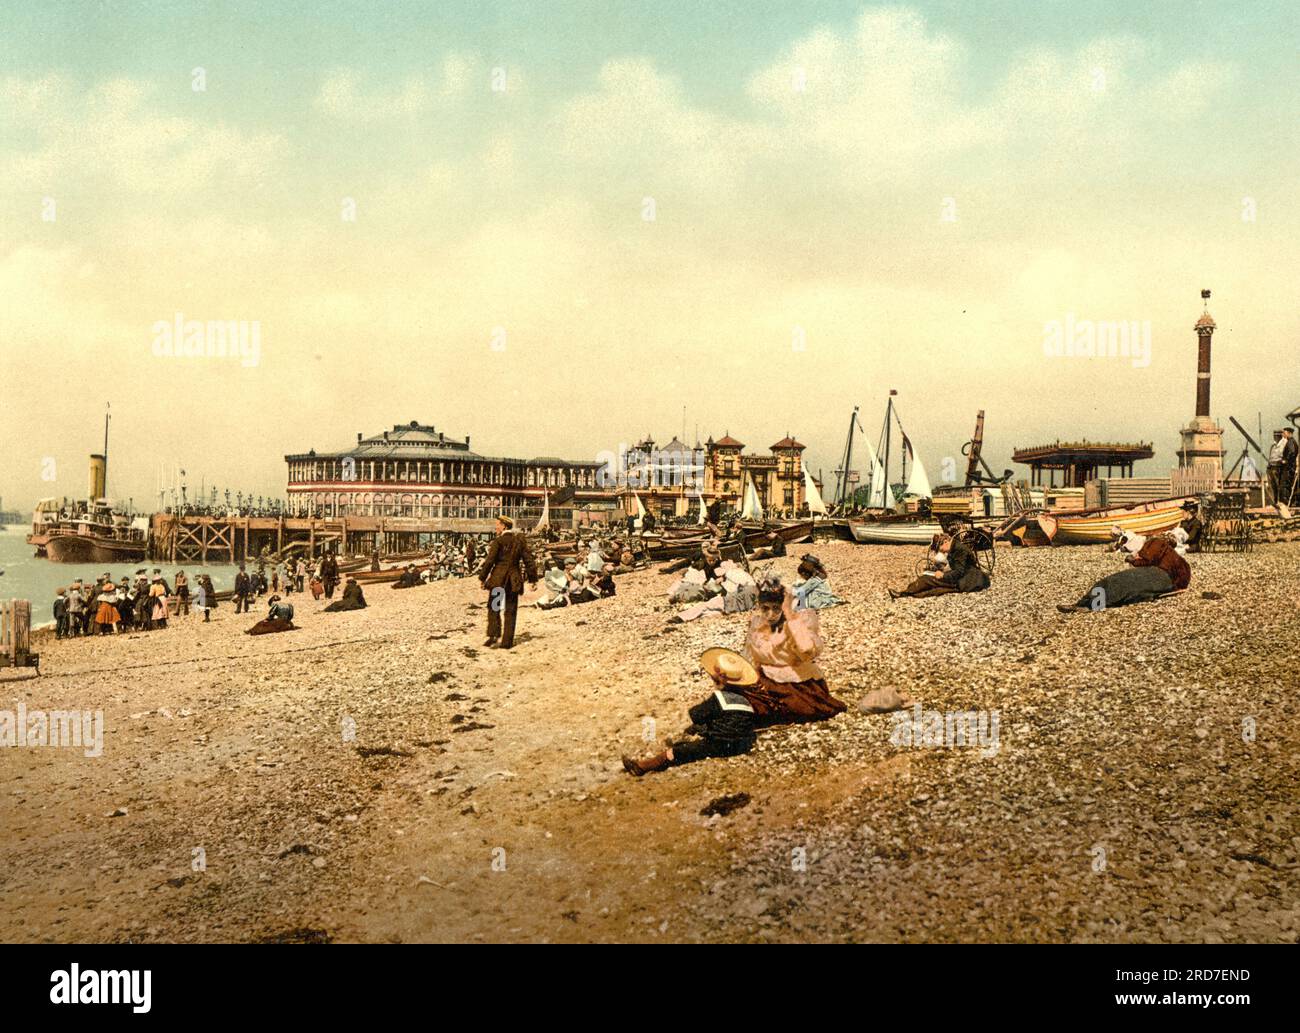 Southsea beach, a seaside resort and a geographic area of Portsmouth, Portsea Island in England, 1895, Historical, digital improved reproduction of an old Photochrome print Stock Photo